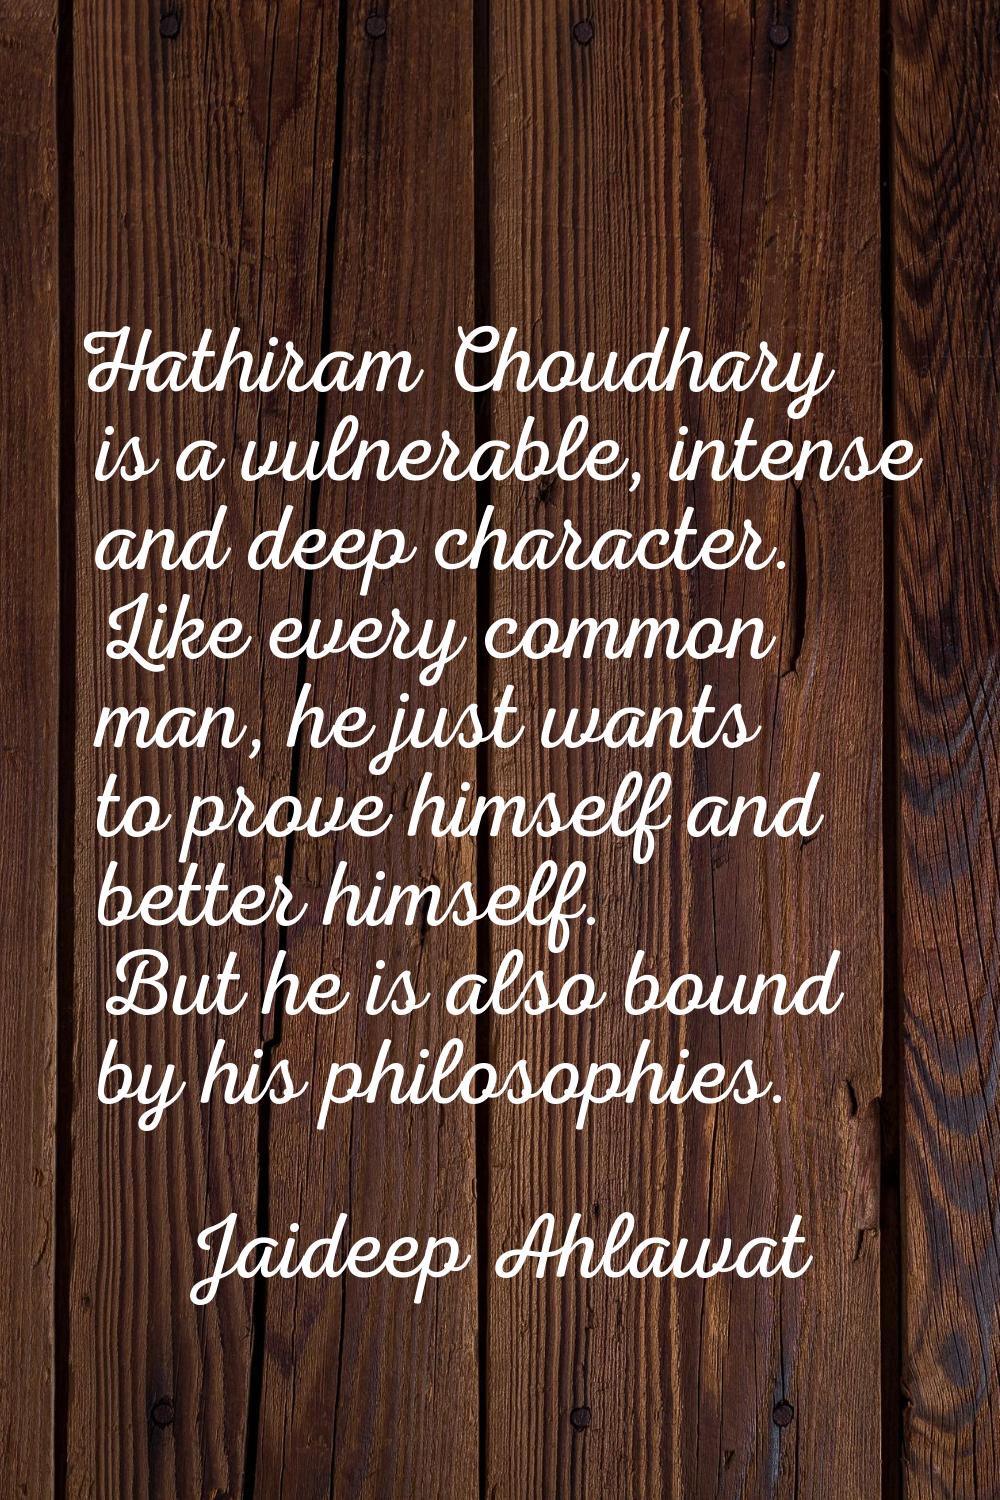 Hathiram Choudhary is a vulnerable, intense and deep character. Like every common man, he just want